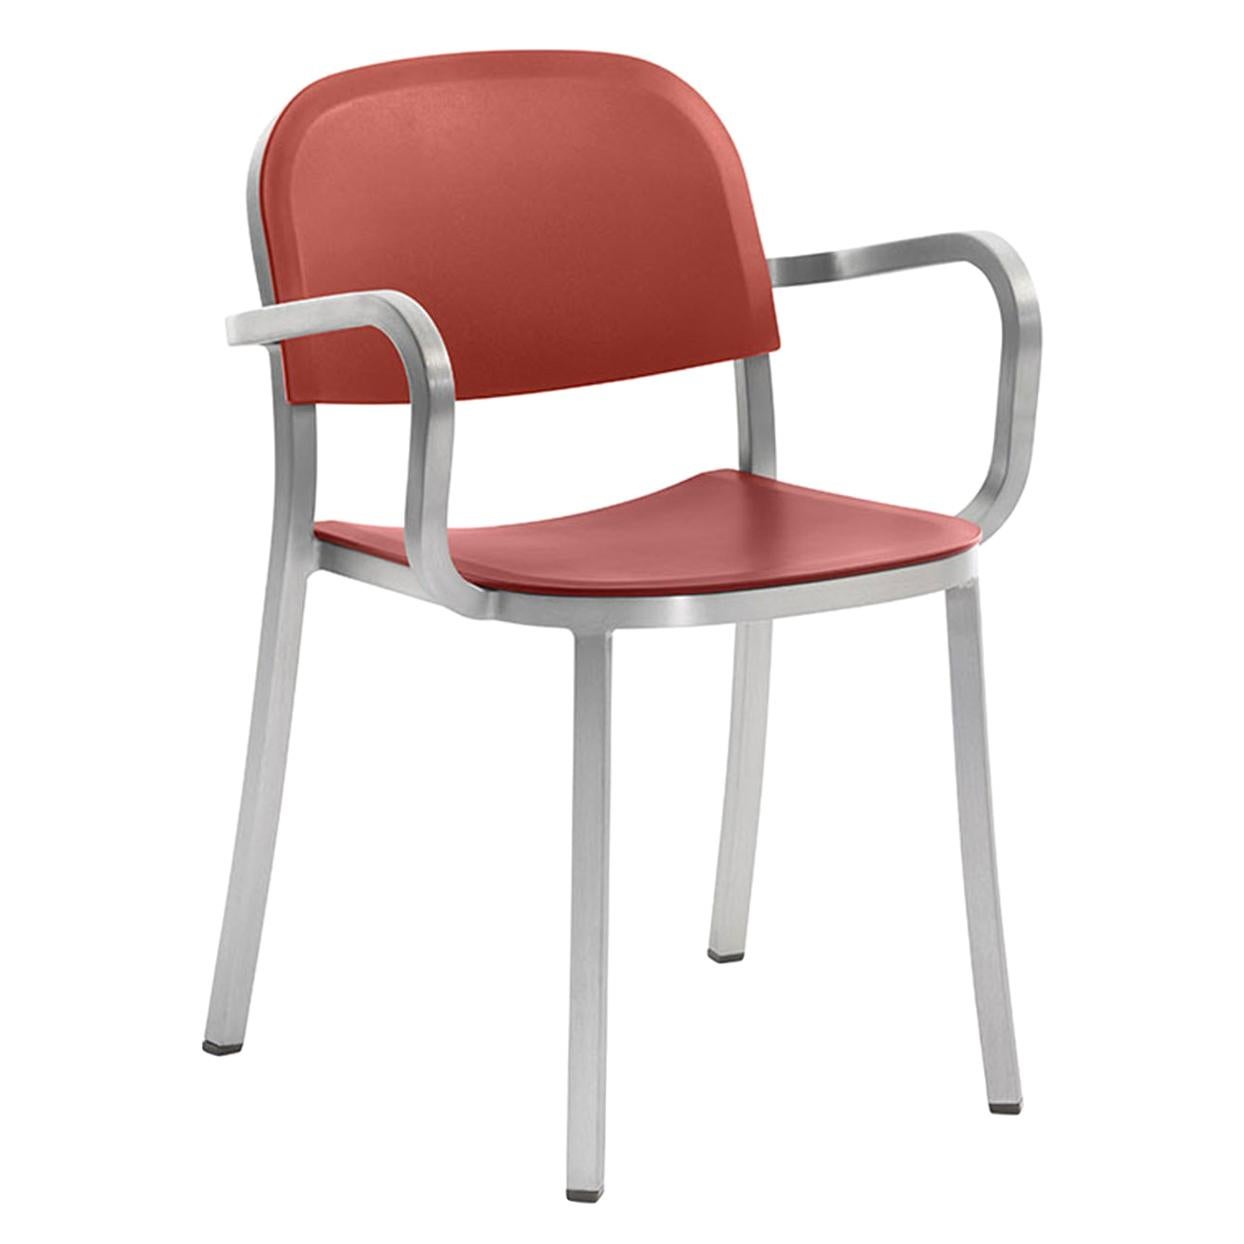 Emeco 1 Inch Armchair in Brushed Aluminum and Red Ochre by Jasper Morrison